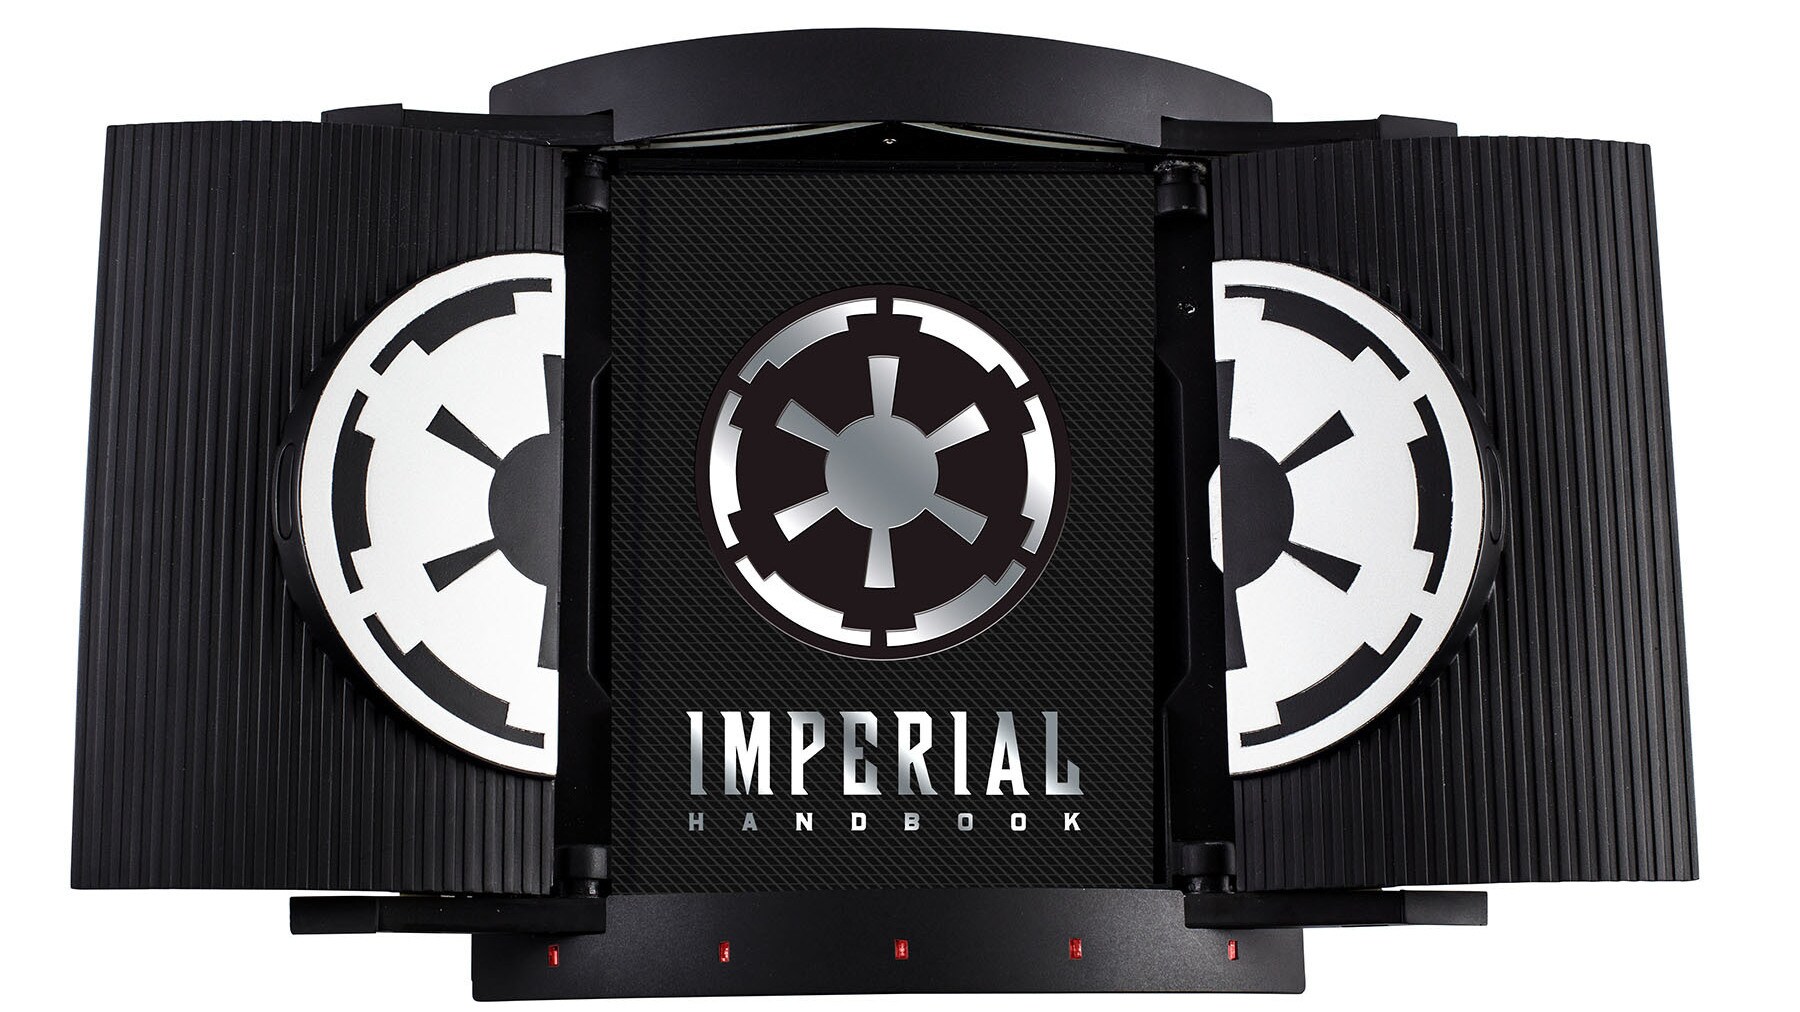 Star Wars: The Imperial Handbook Brings You Inside the Empire